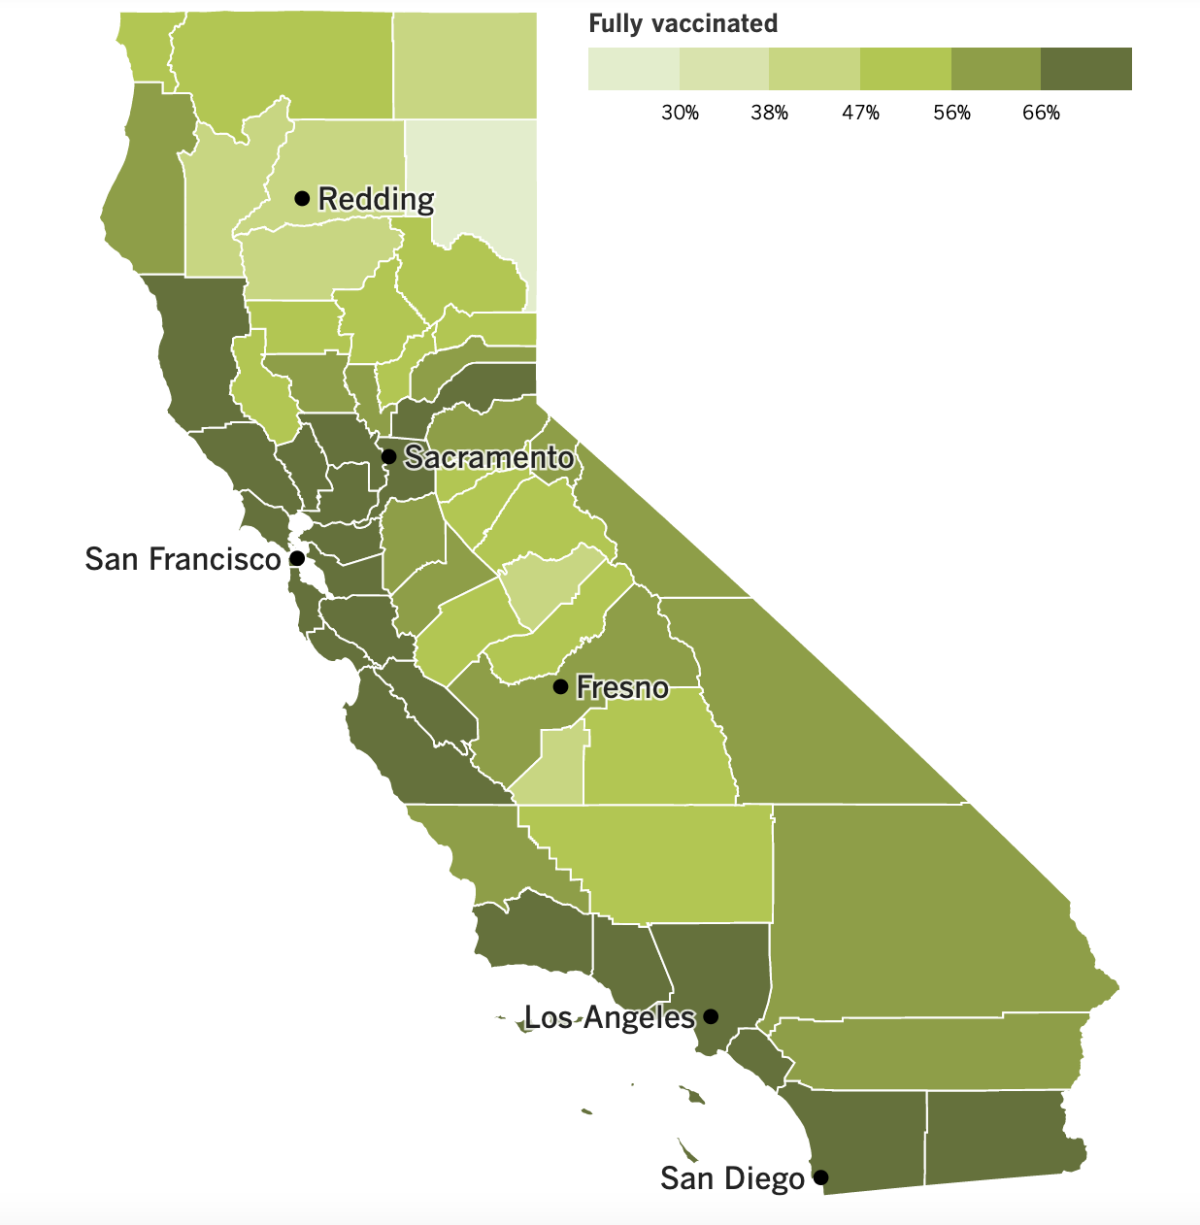 A map showing California's COVID-19 vaccination progress by county as of March 15, 2022.